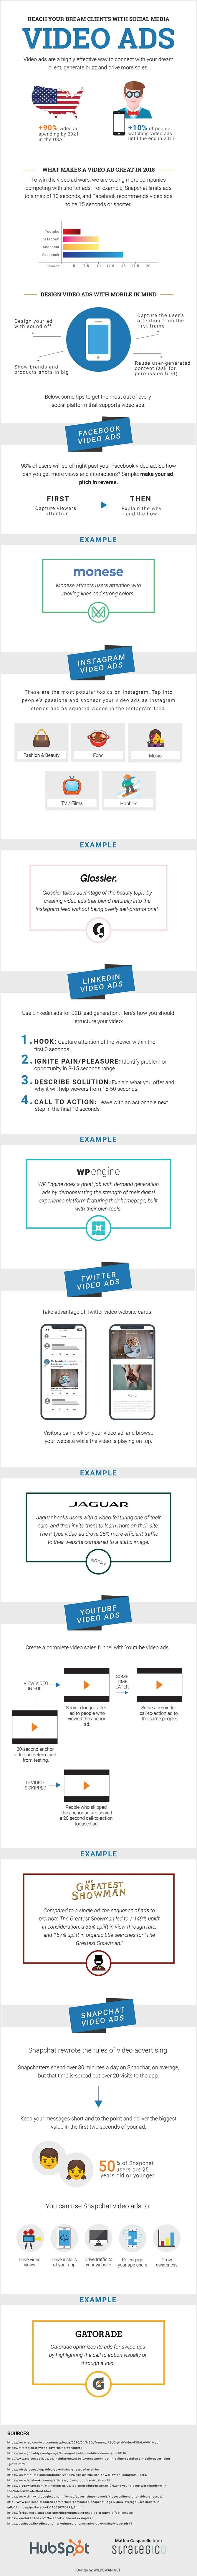 How to Connect With Your Dream Clients Through Social Media Video Ads - infographic